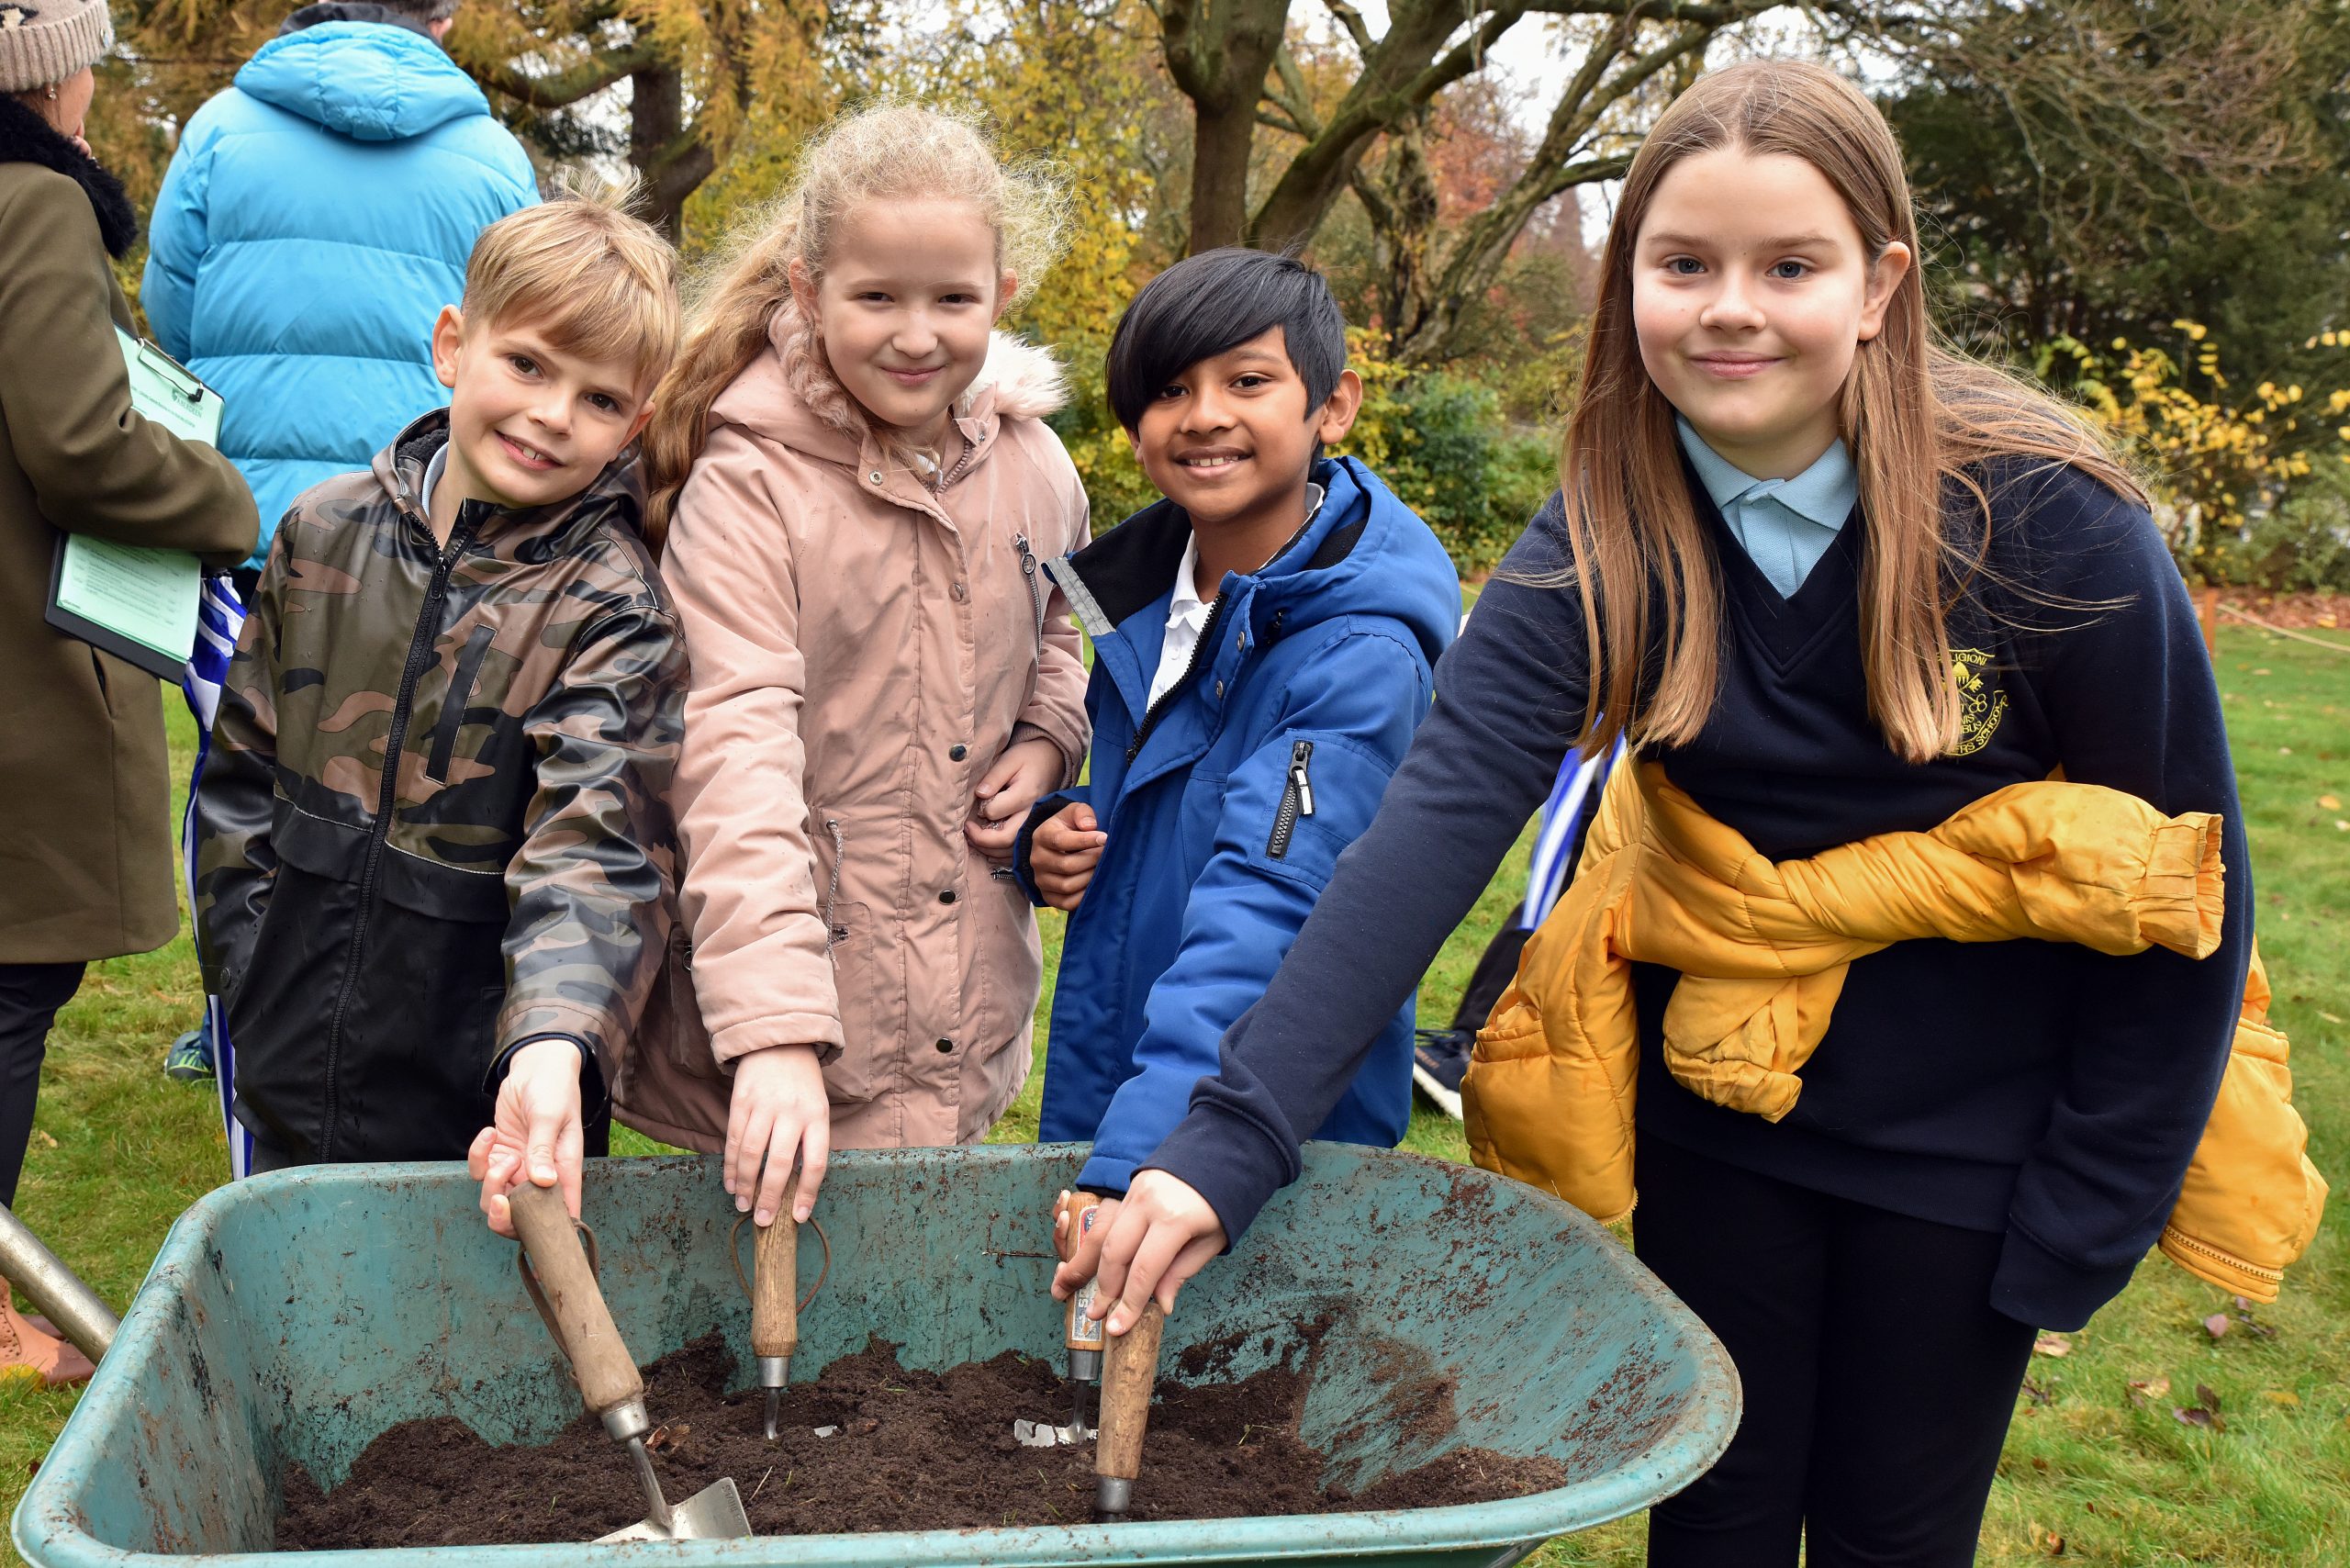 Pupils at the time capsule burial ceremony - News